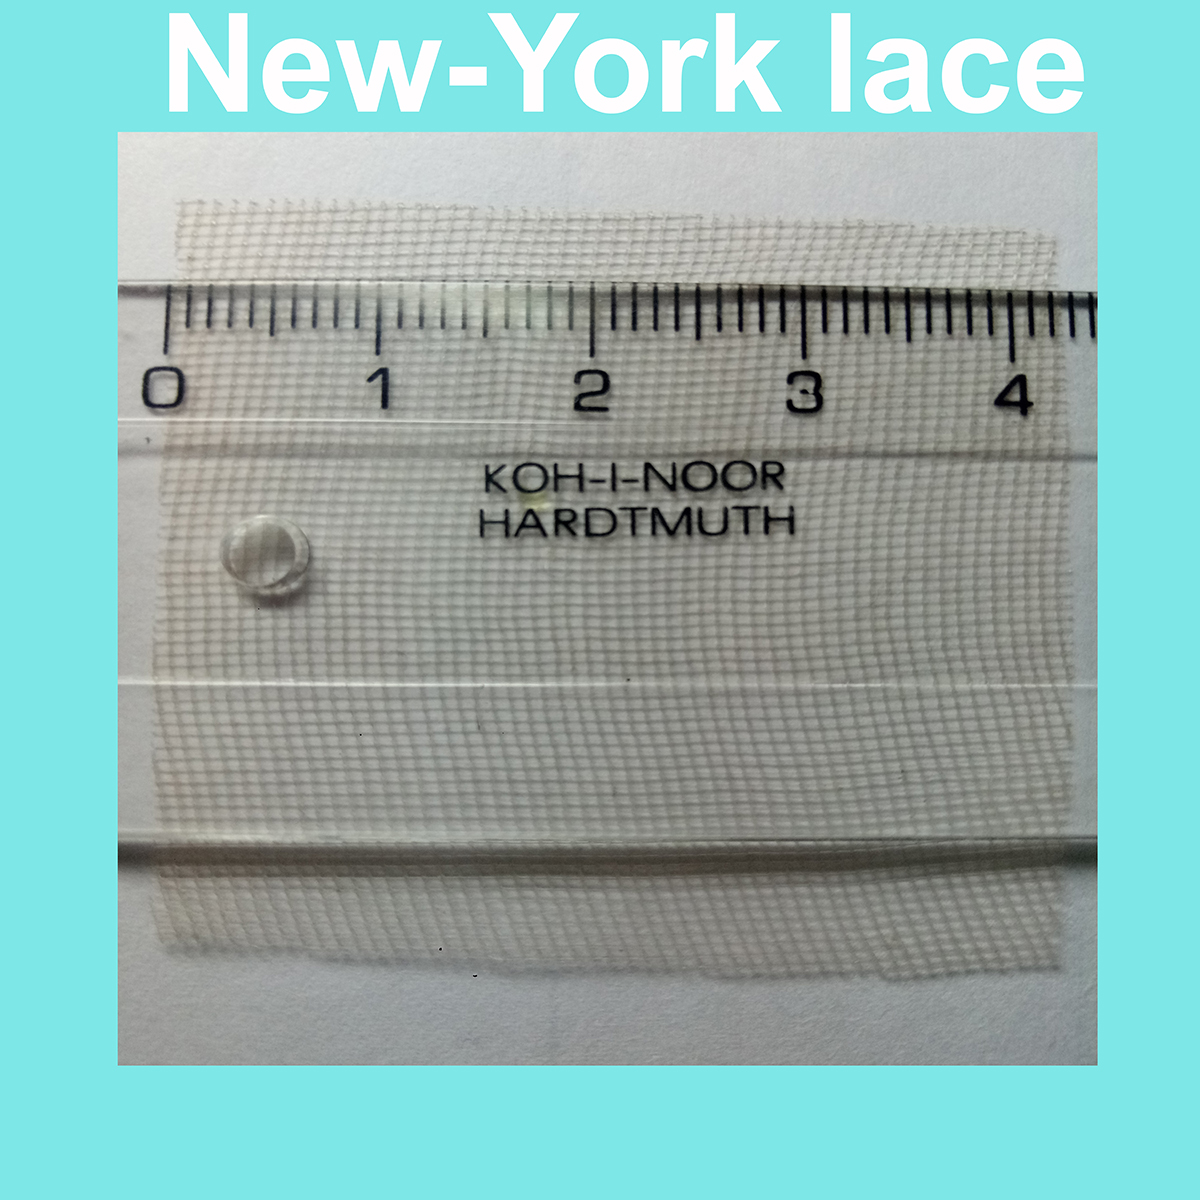 new-york-lace